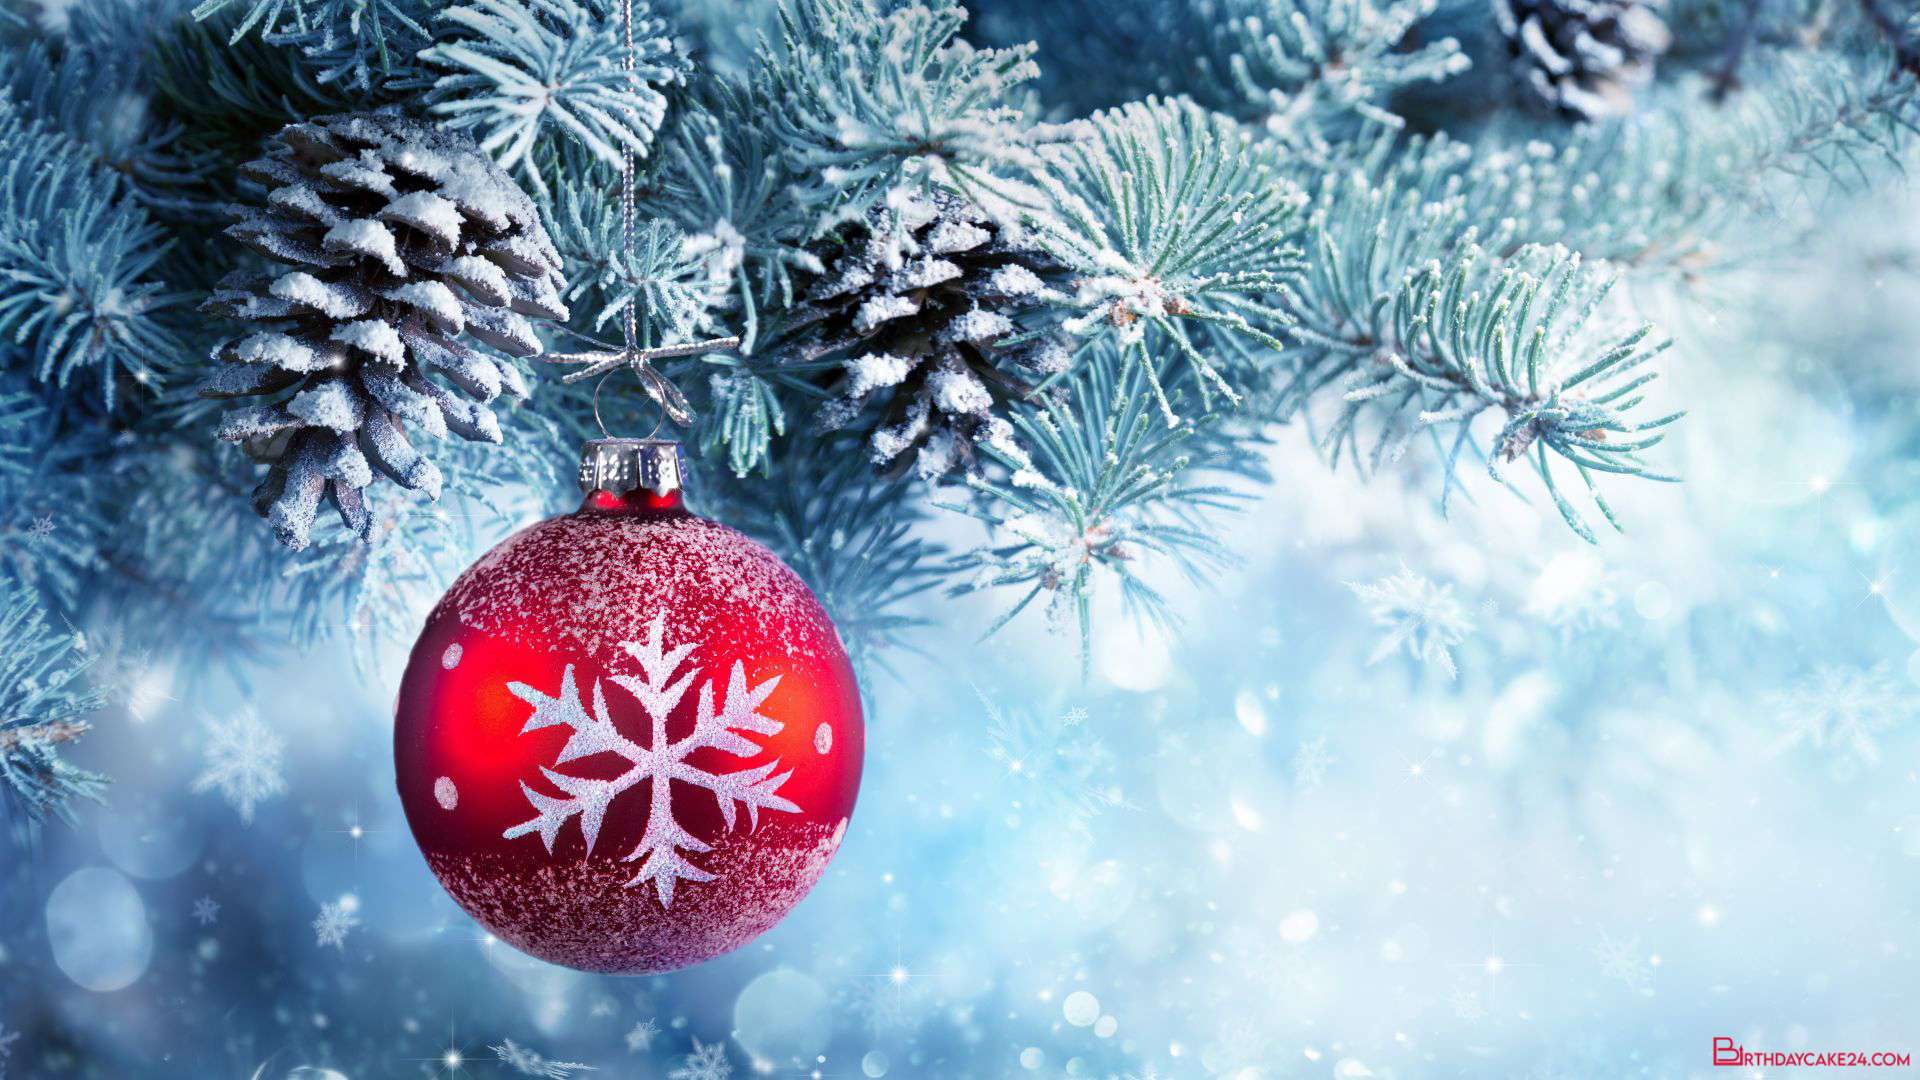 Background Merry Christmas Wallpaper